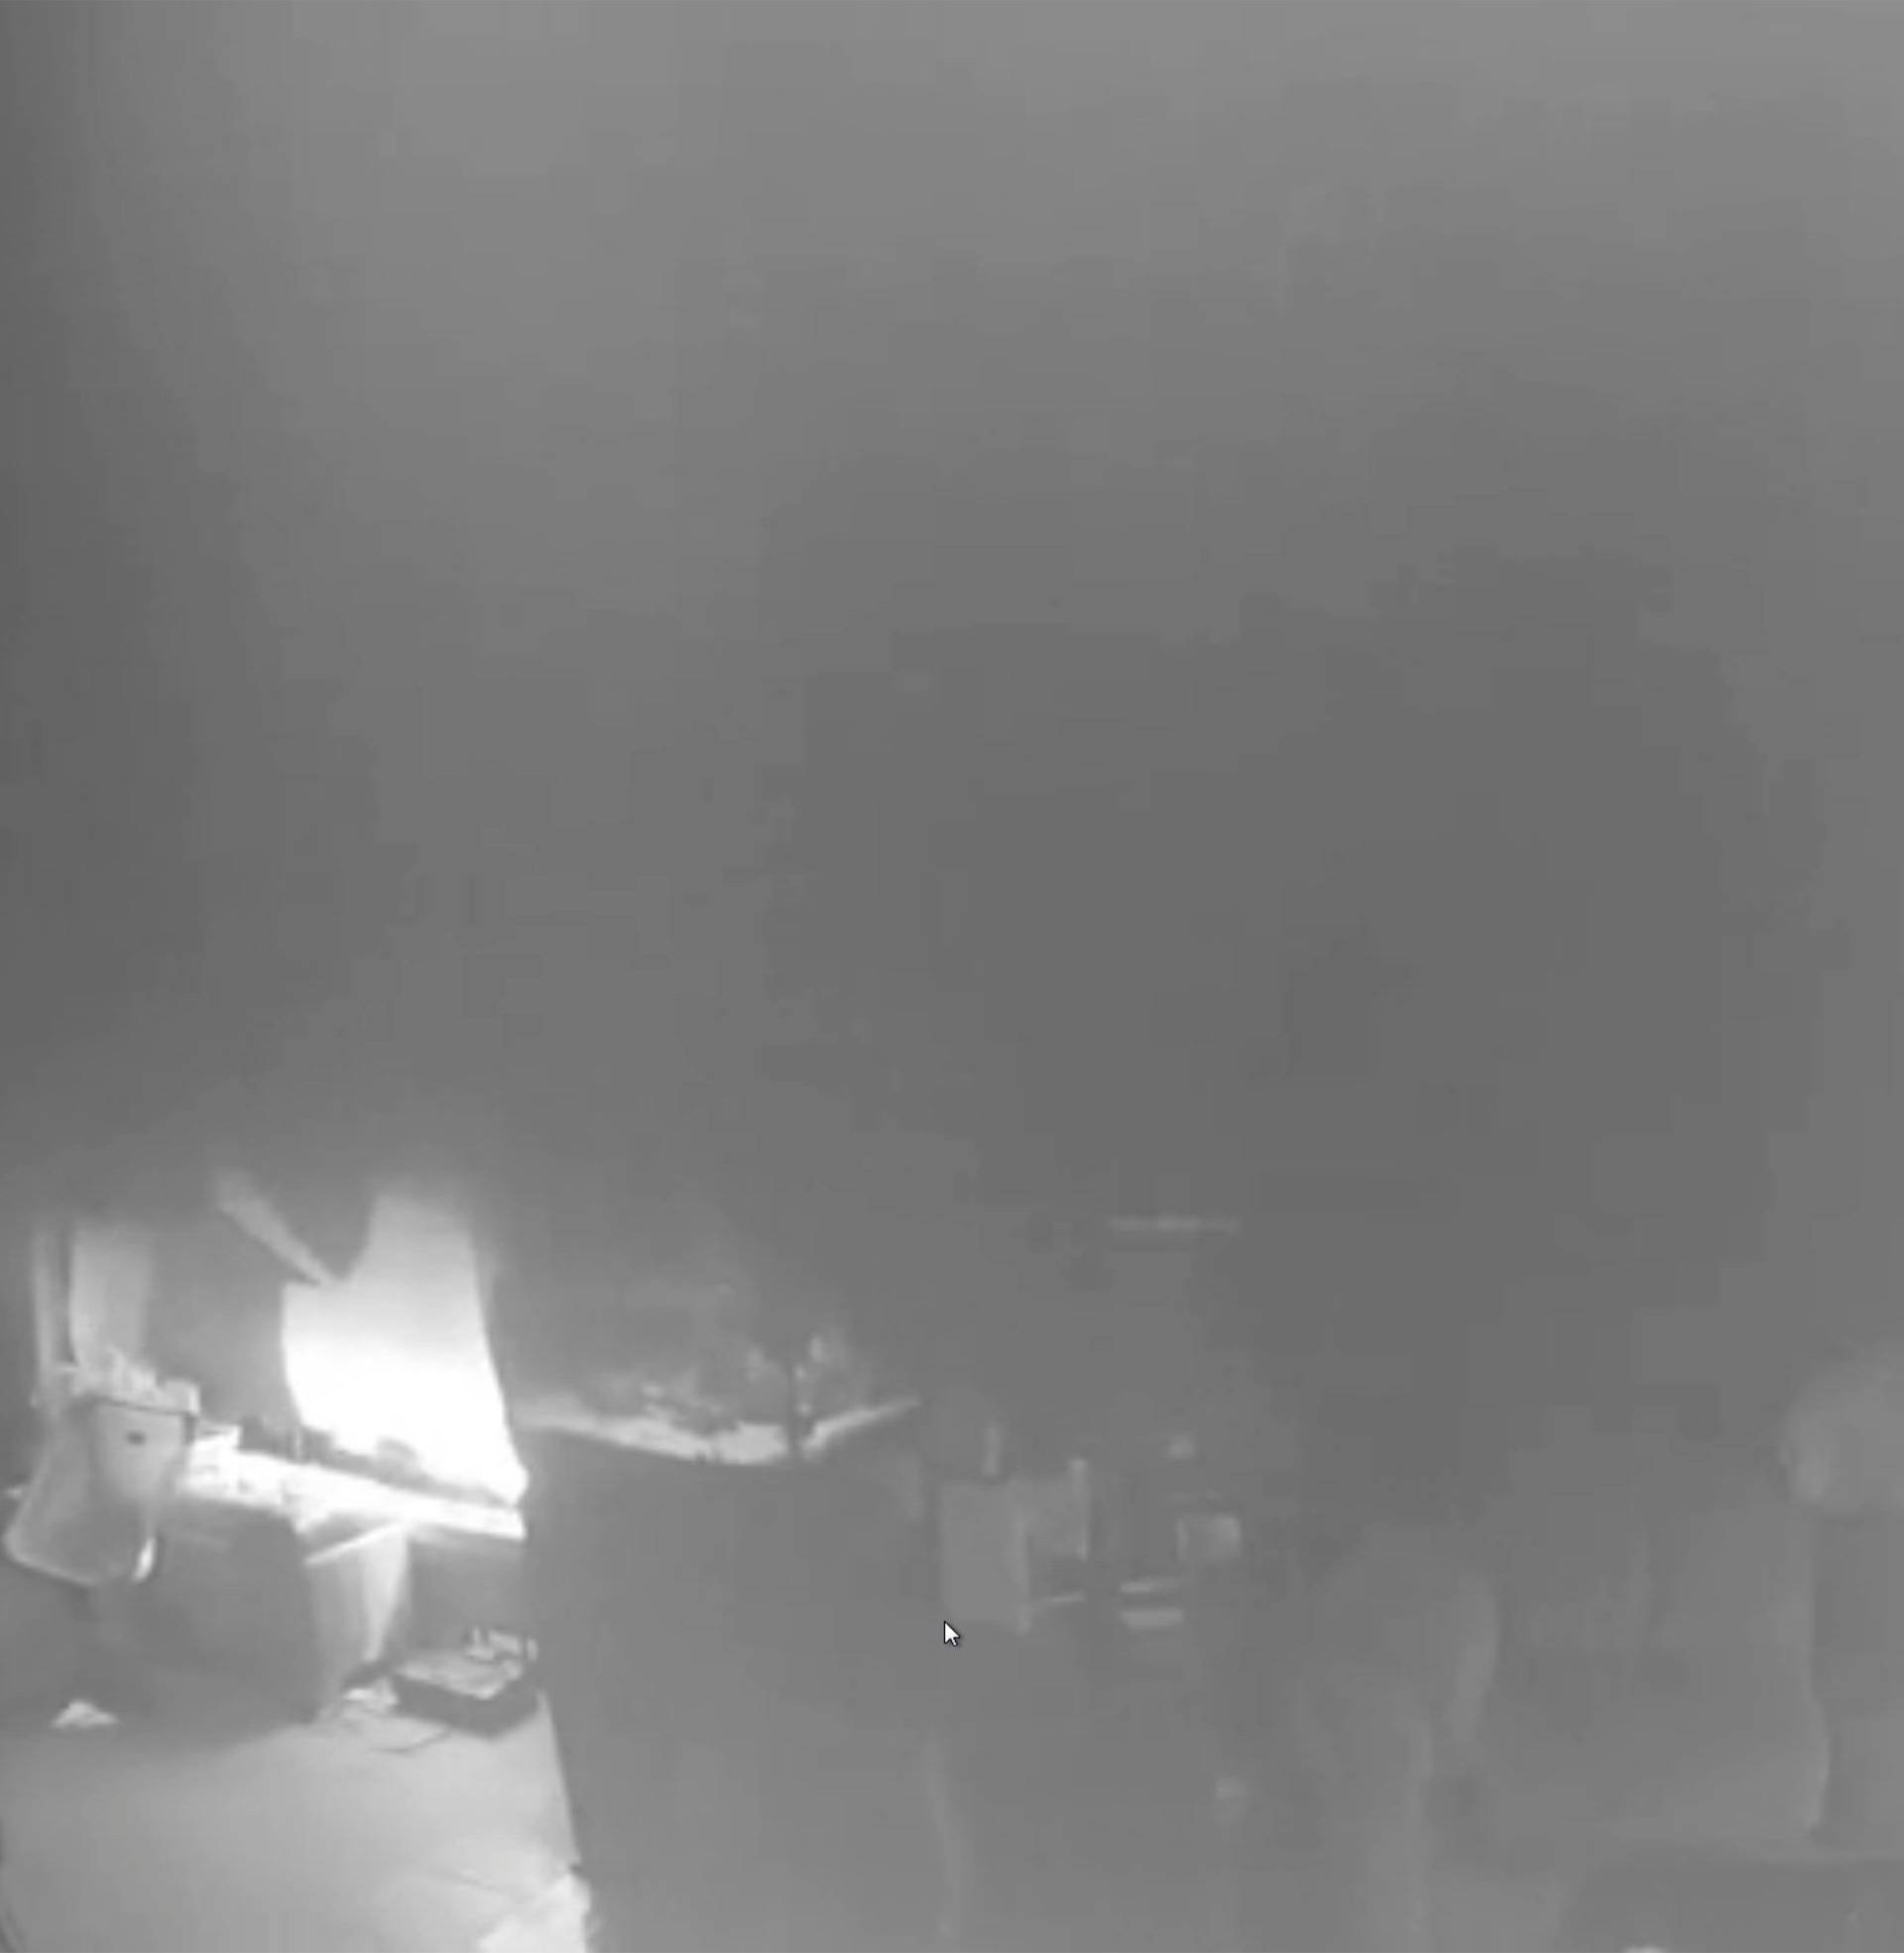 A still image captured from surveillance video footage shows wildfire engulfing the home of James O'Reilly in Fort McMurray Alberta